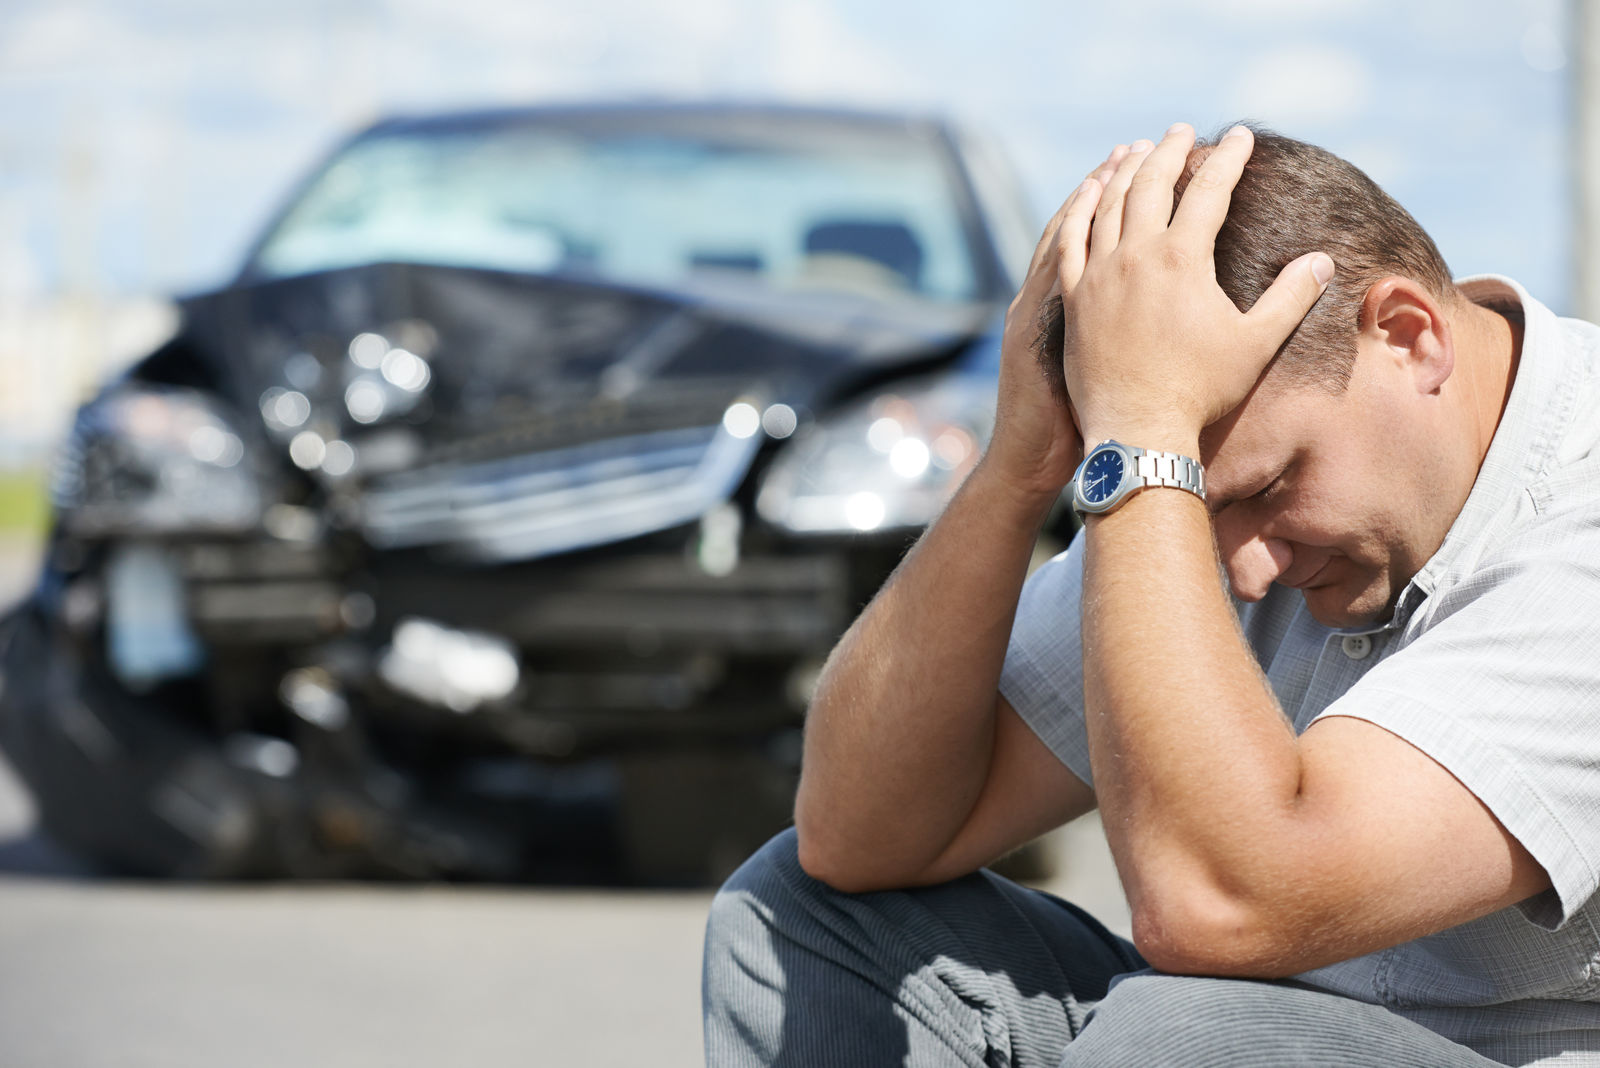 Do car insurance companies cover DUI accidents?